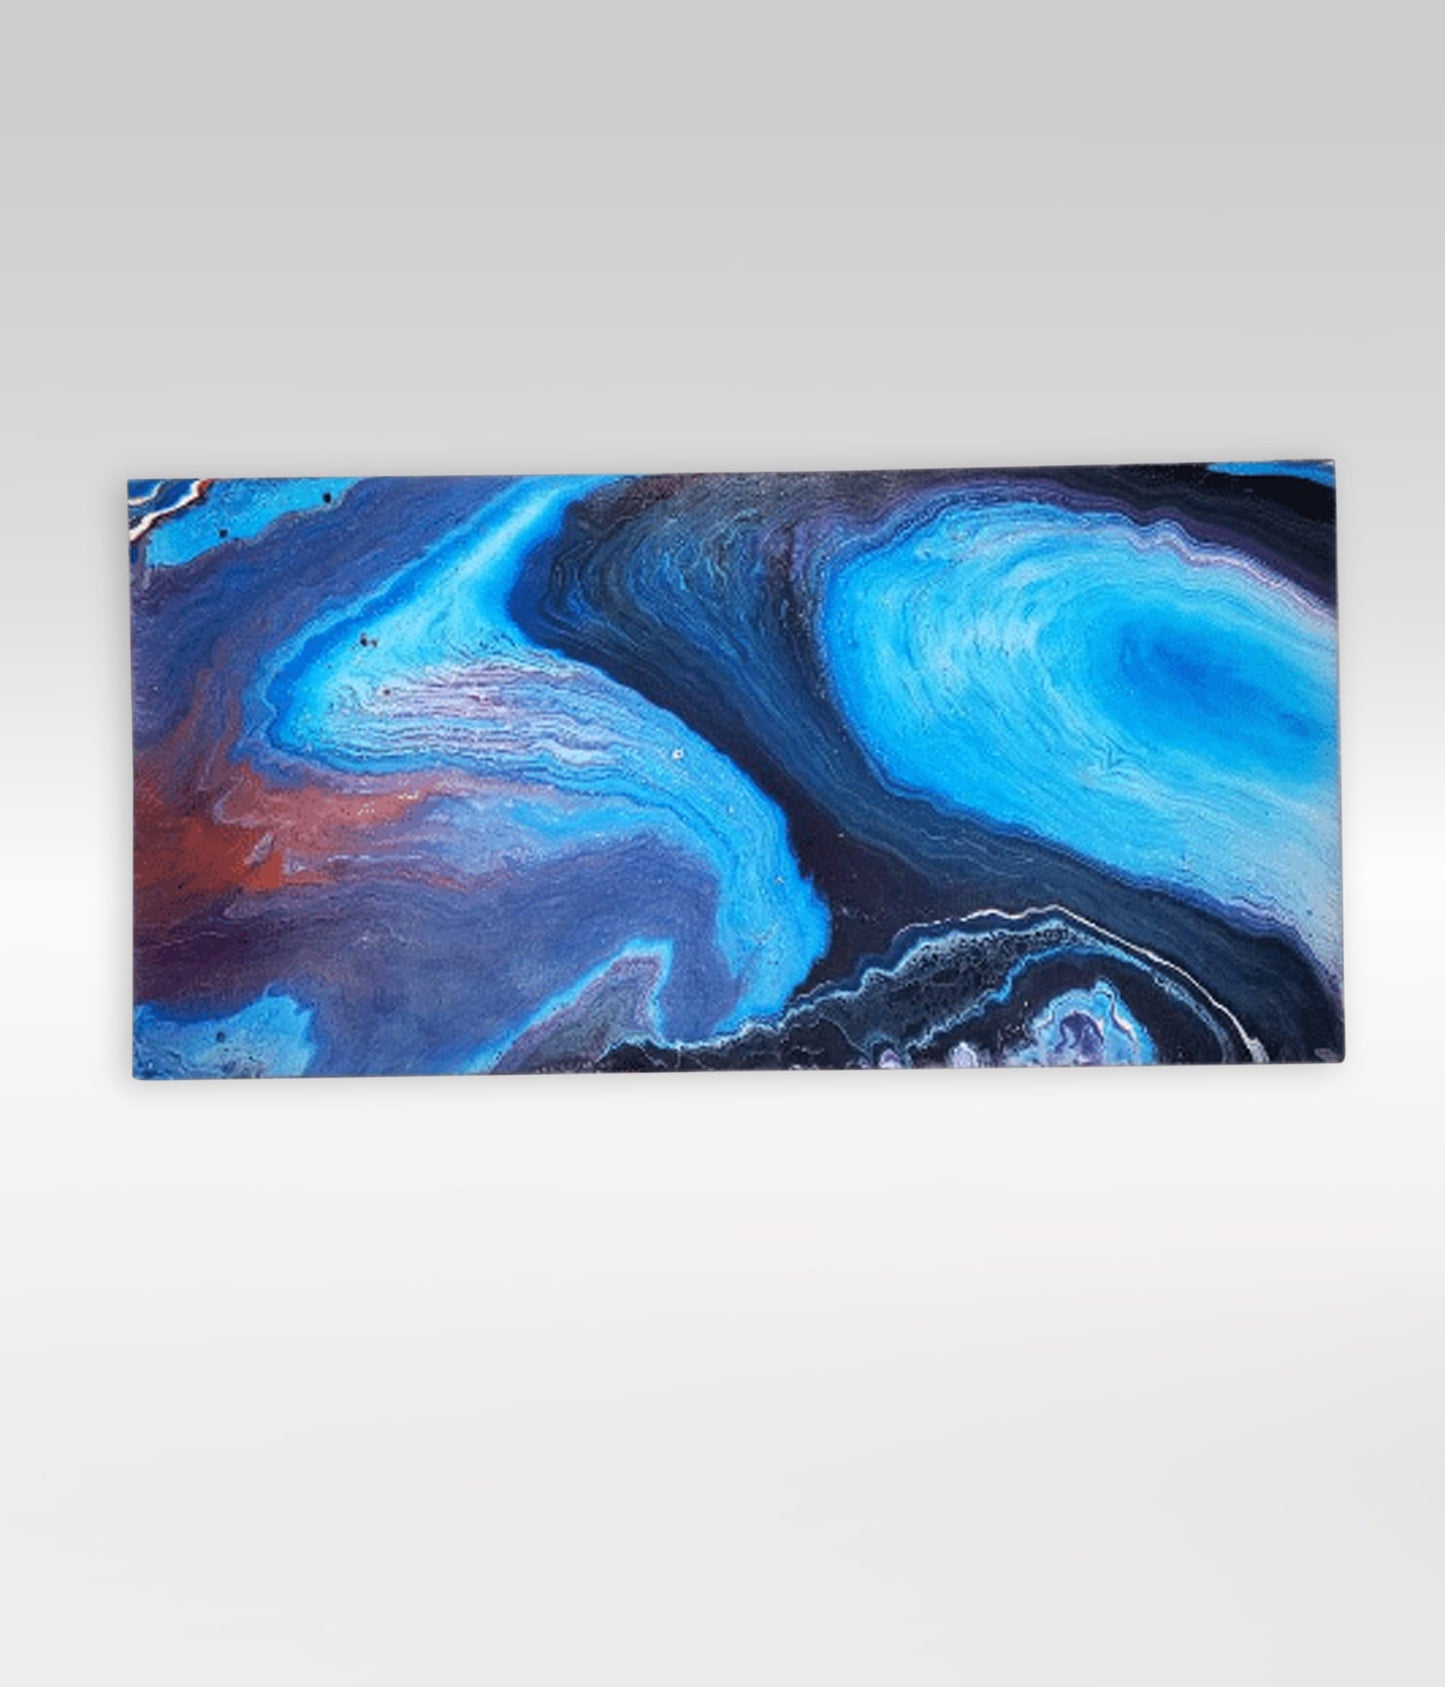 The Whirlpool – 24 x 48 Acrylic Pour On Canvas